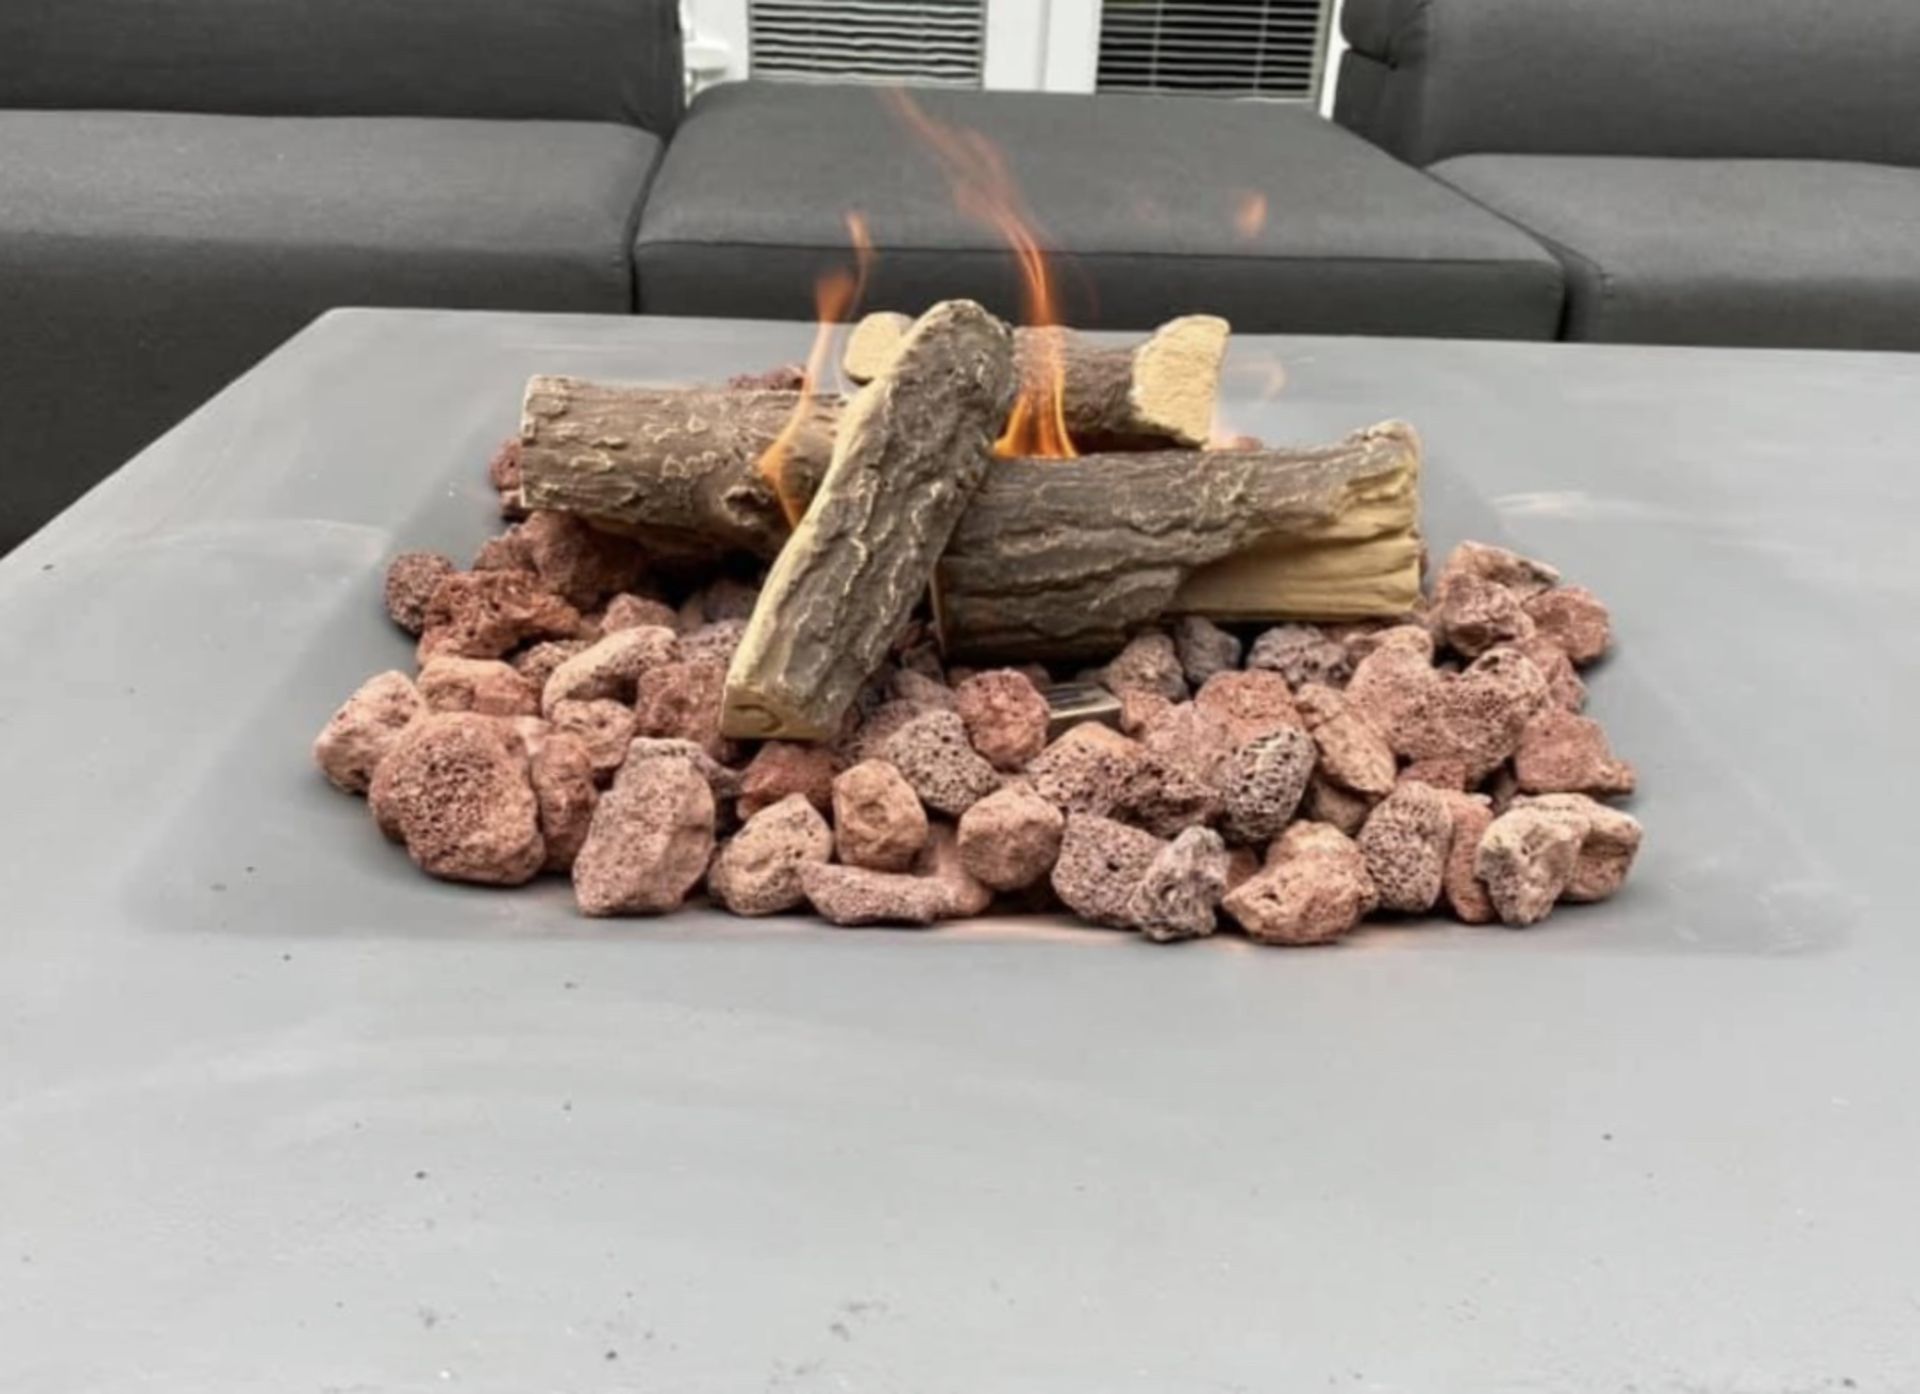 1x Concrete resin gas firepit around 80cm square cube size with storage for gas bottle inside - Image 2 of 2